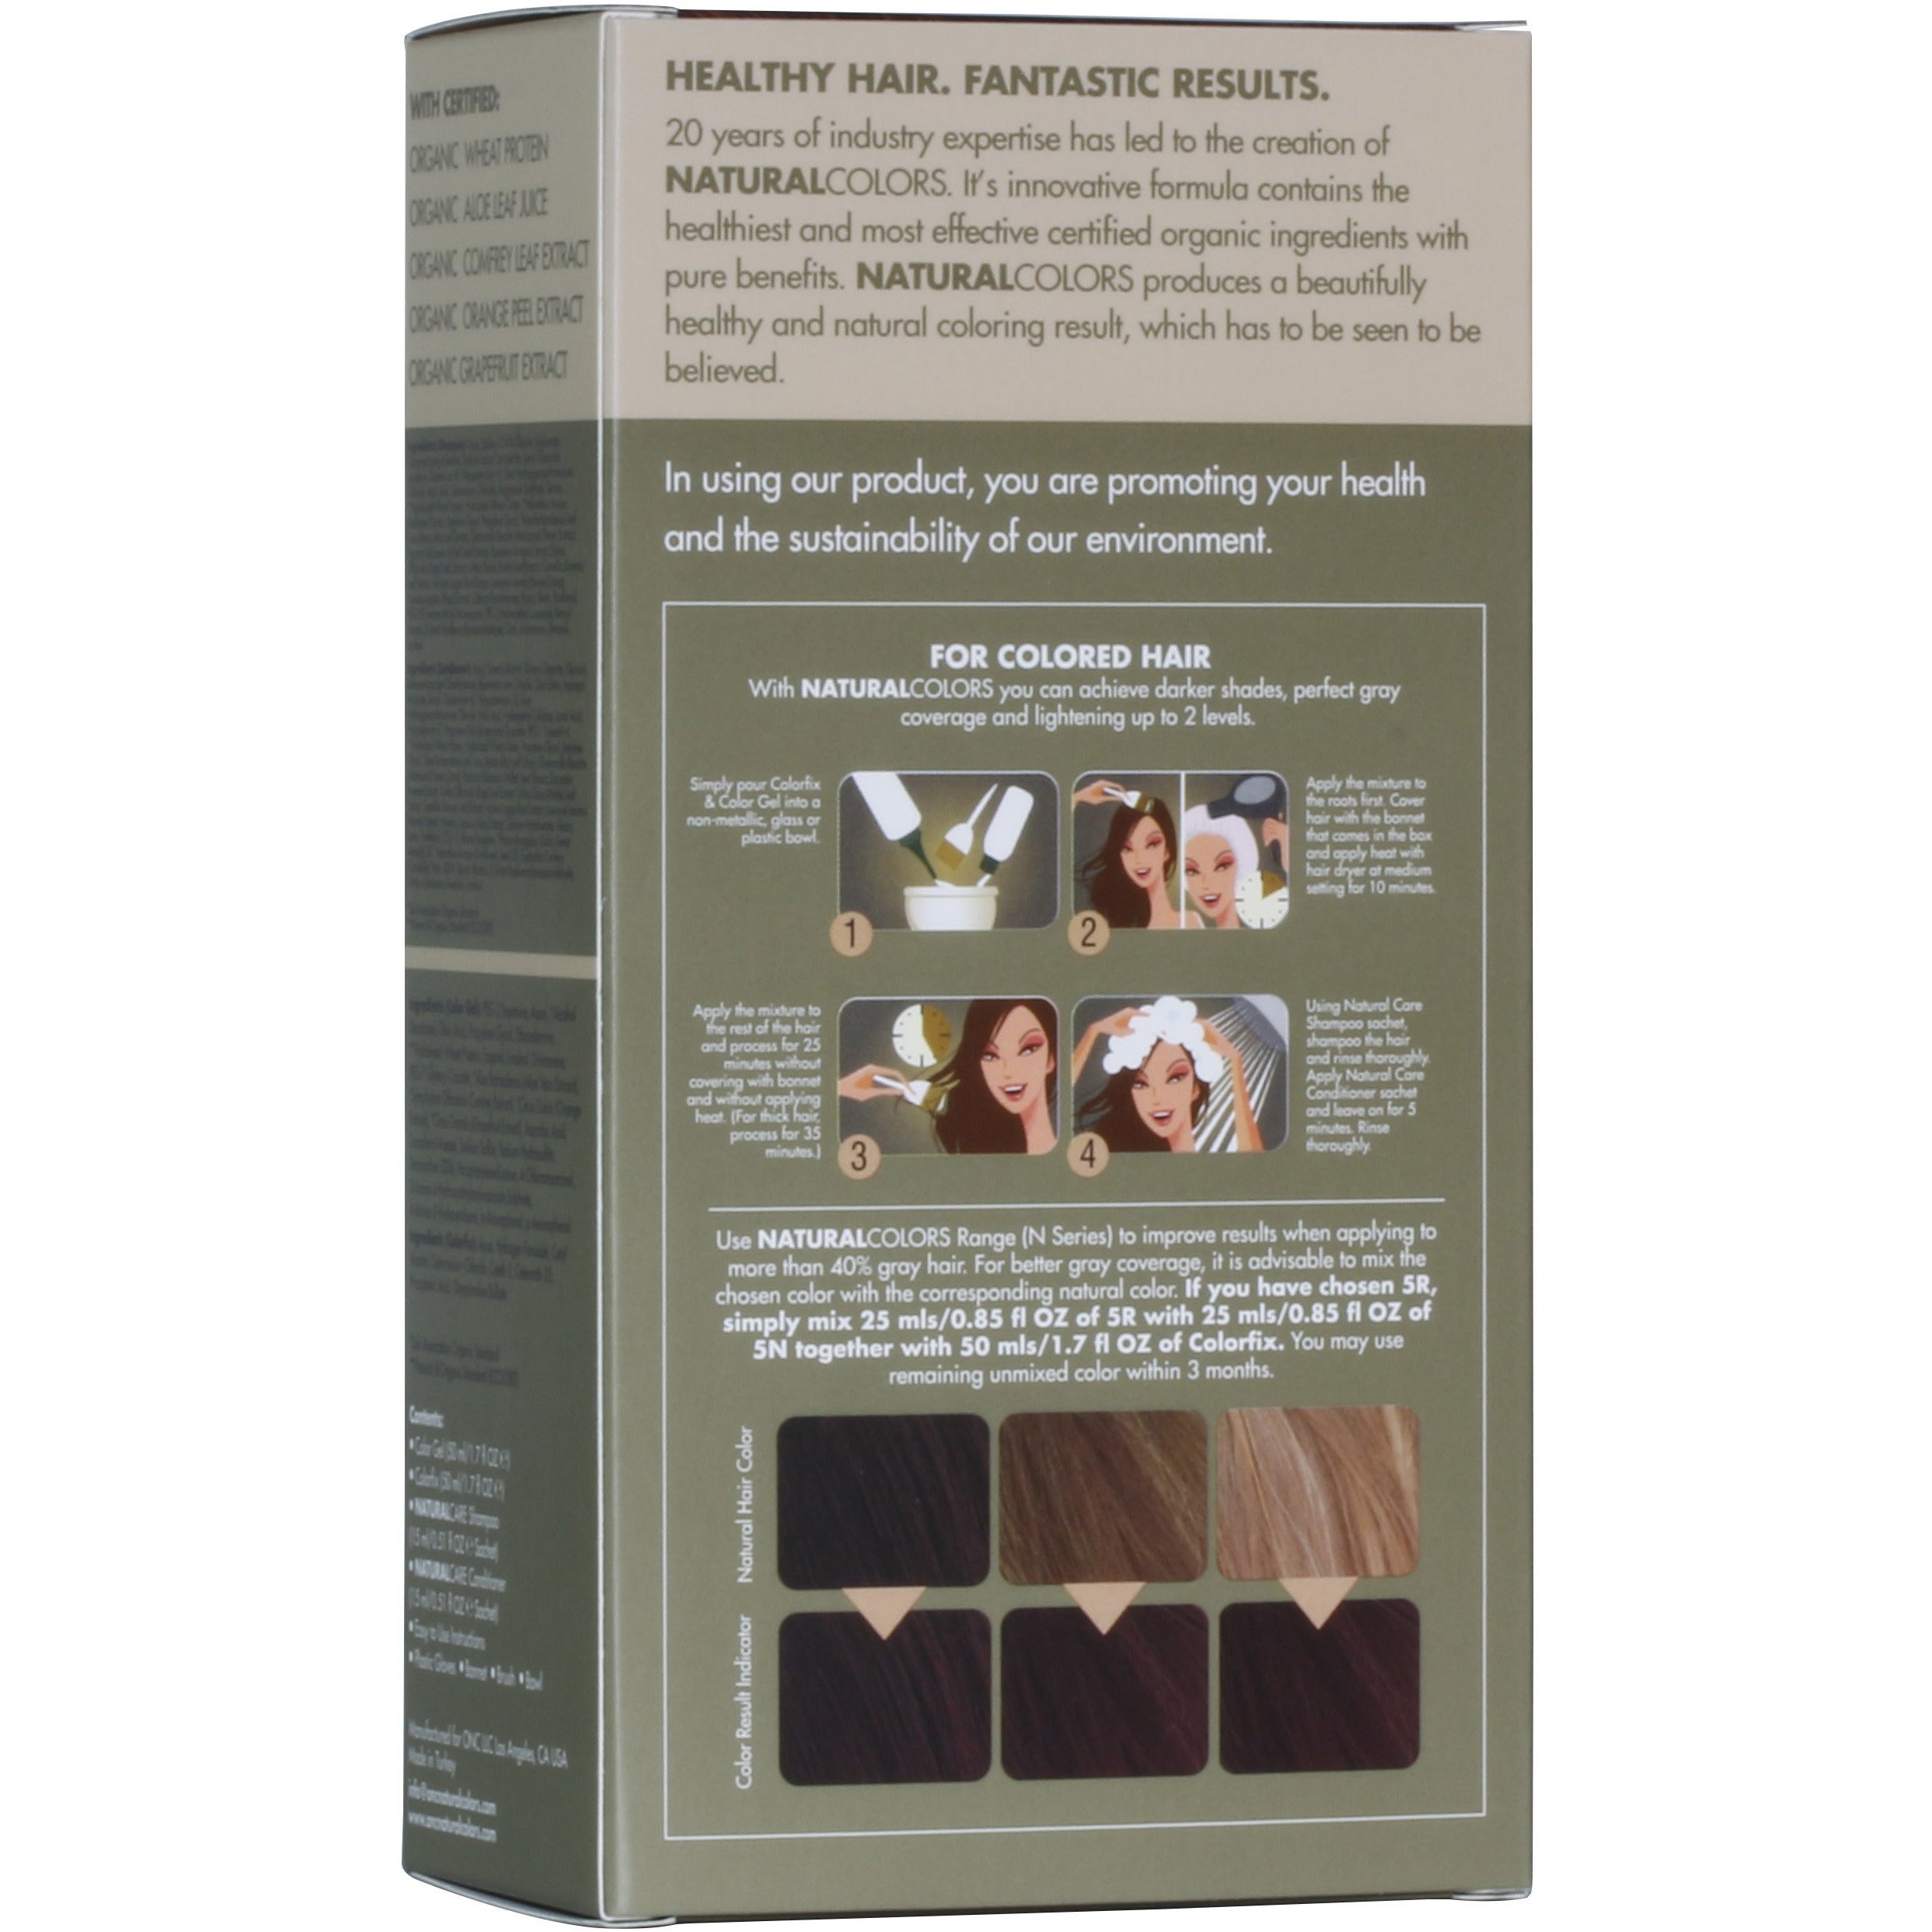 5R Rich Copper Brown Heat Activated Hair Dye With Organic Ingredients - 120 ml (4 fl. oz)